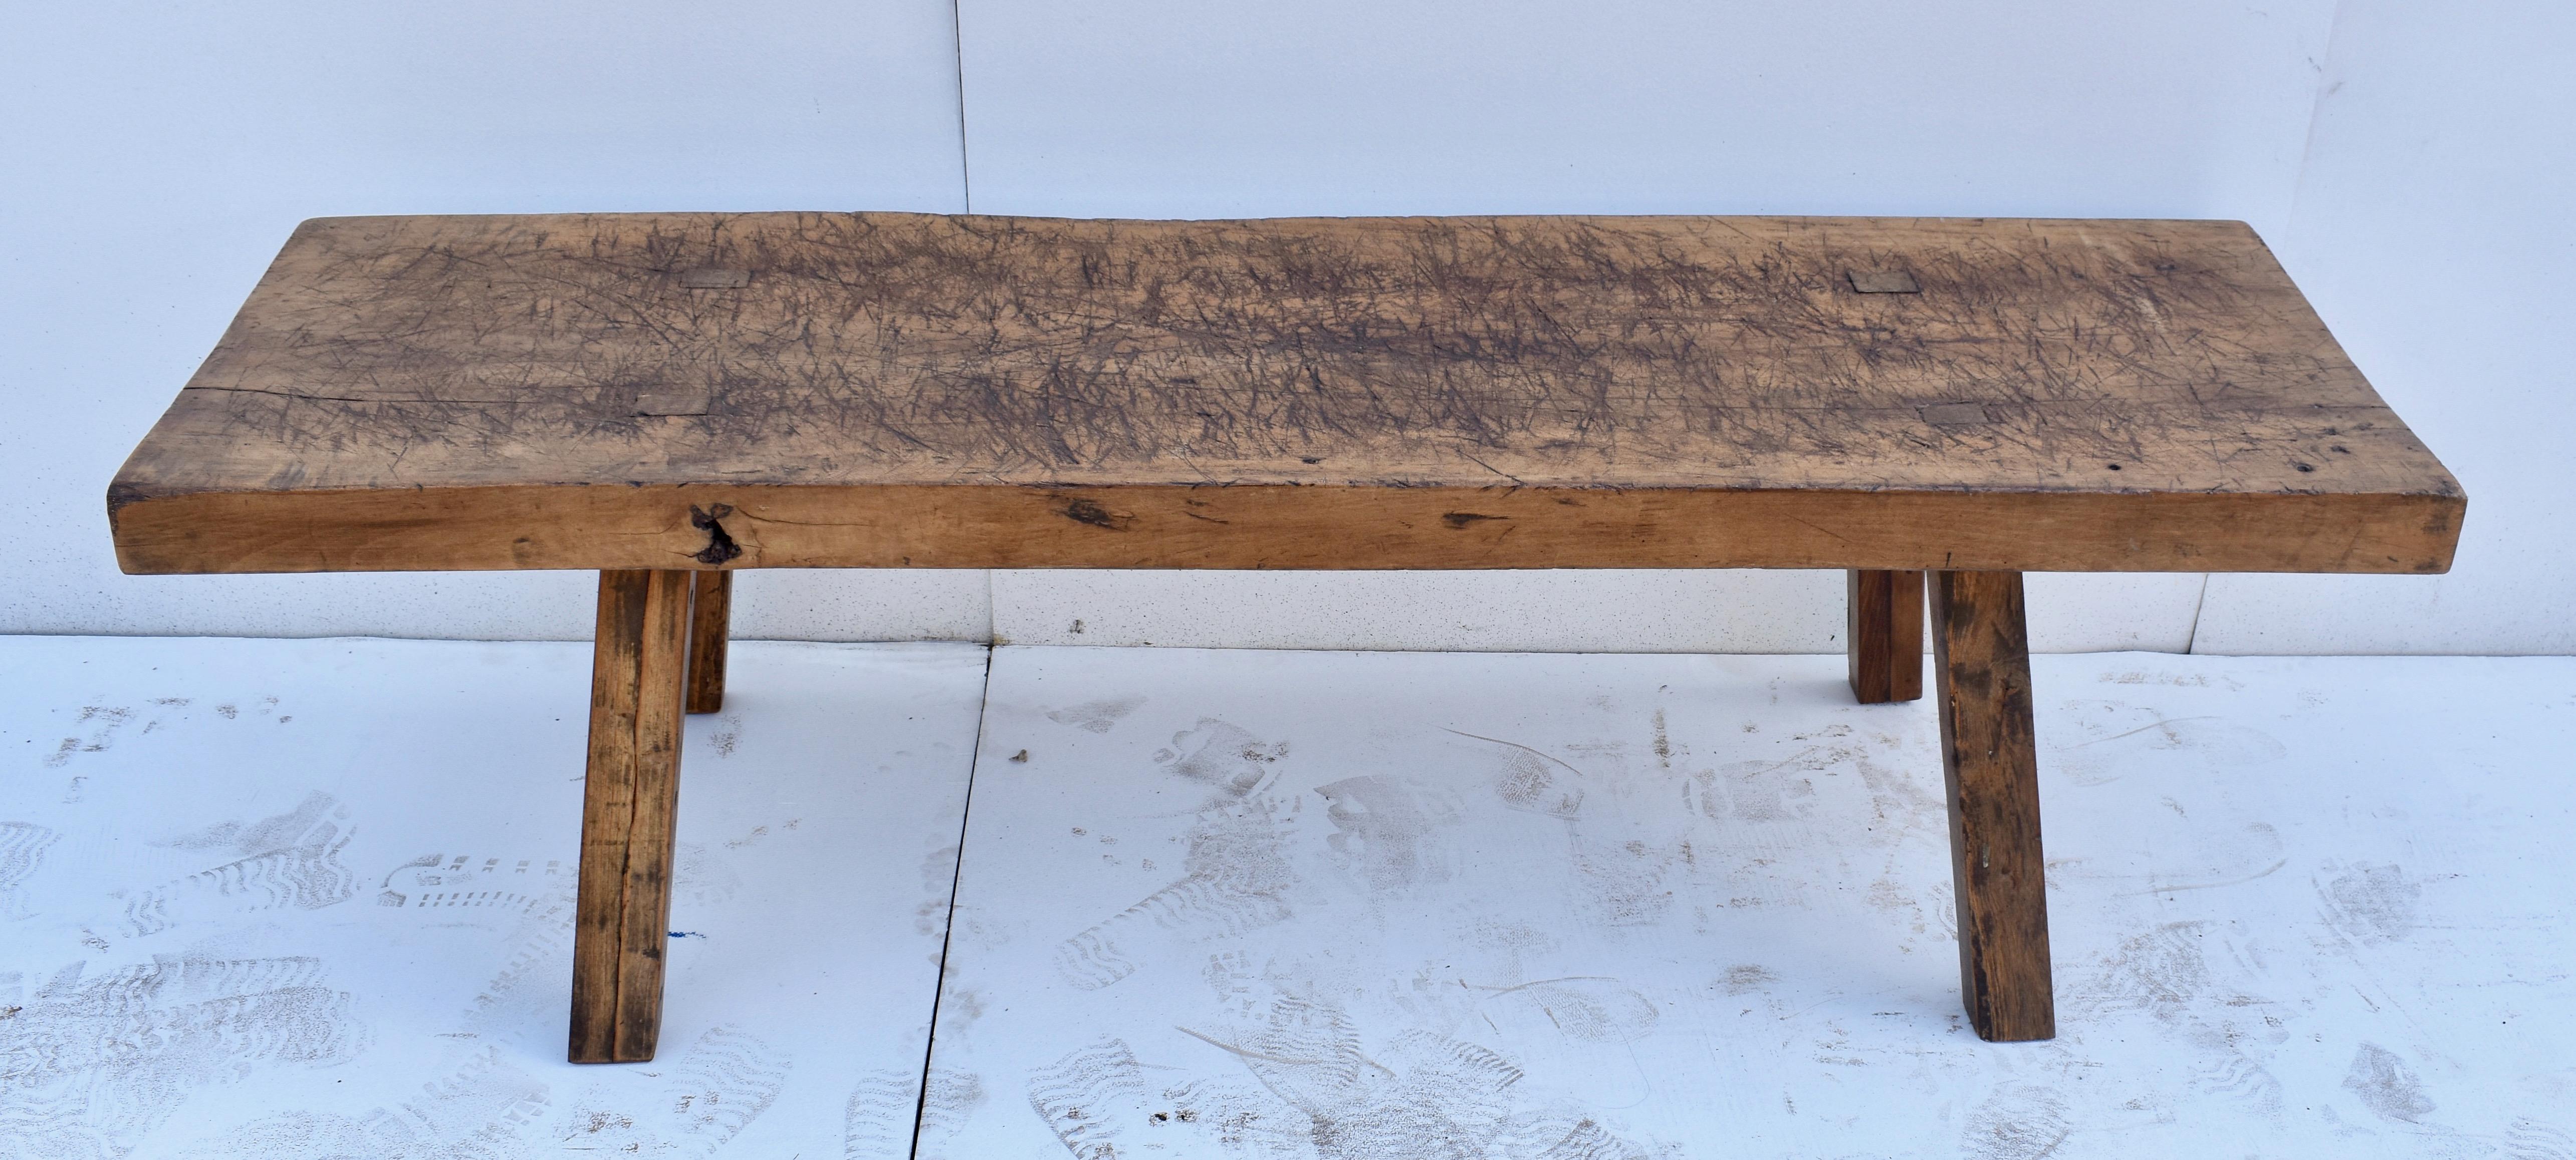 The top of this handsome cut down Pig Bench is a single slab of oak almost 3” thick. It is chopped and sliced and gnarled through decades of purposeful use but is still pretty much flat and allows the table to sit nice and steady. The sturdy legs